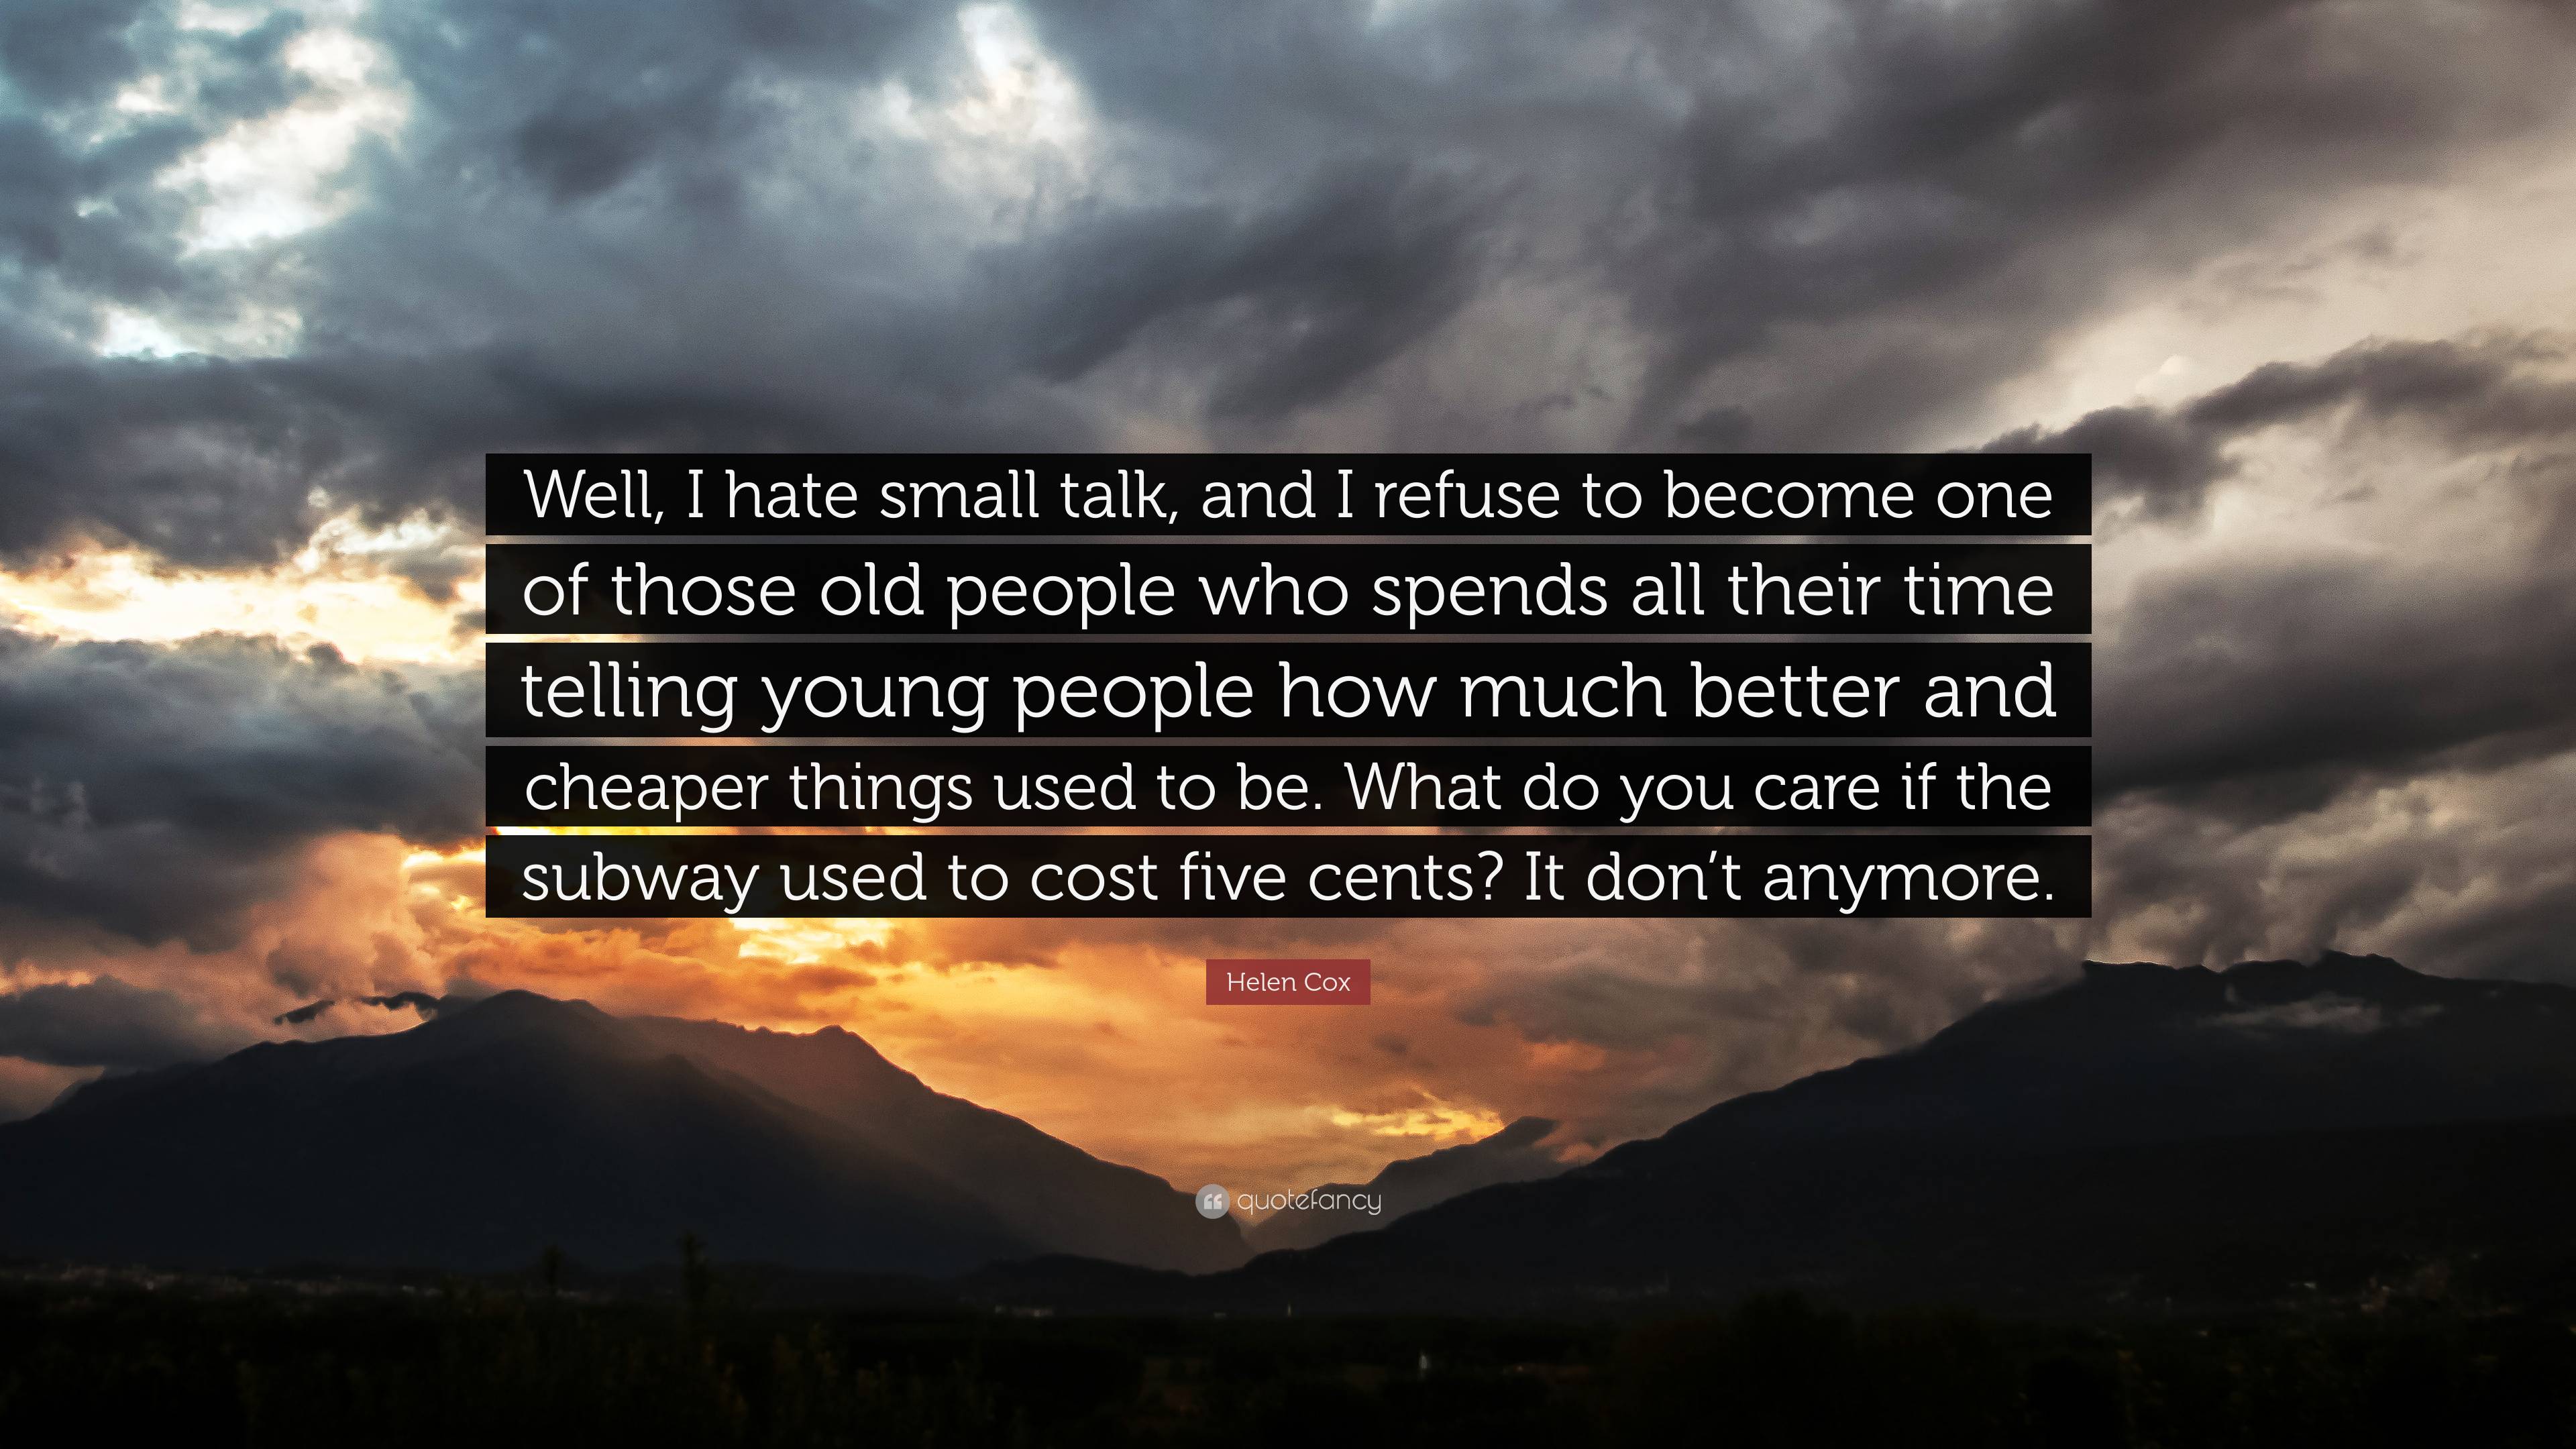 Helen Cox Quote: “Well, I hate small talk, and I refuse to become one ...